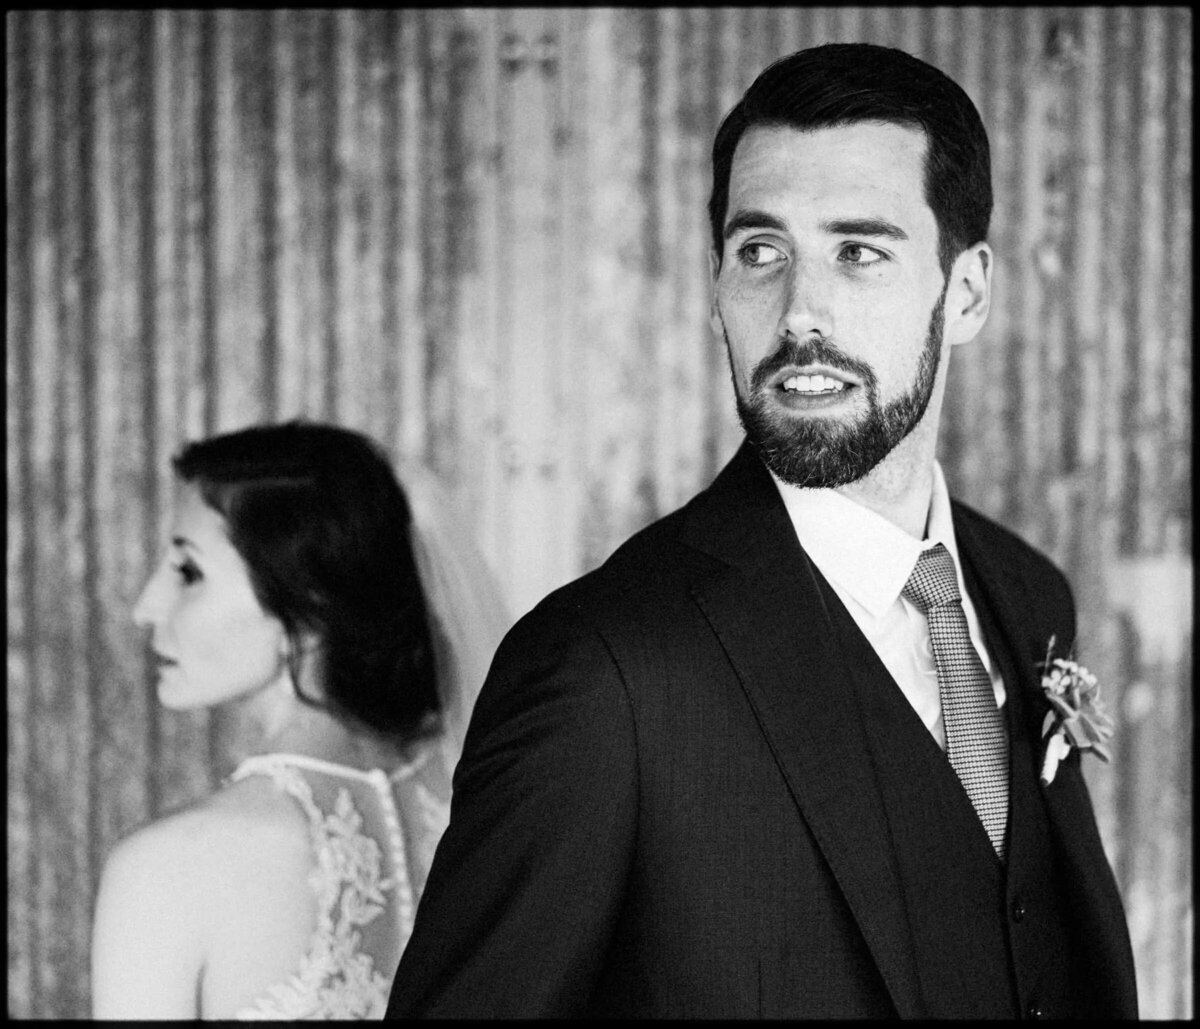 Black and white photo of a bride and groom, focused on the groom's expression as he looks to the side with the bride in the background